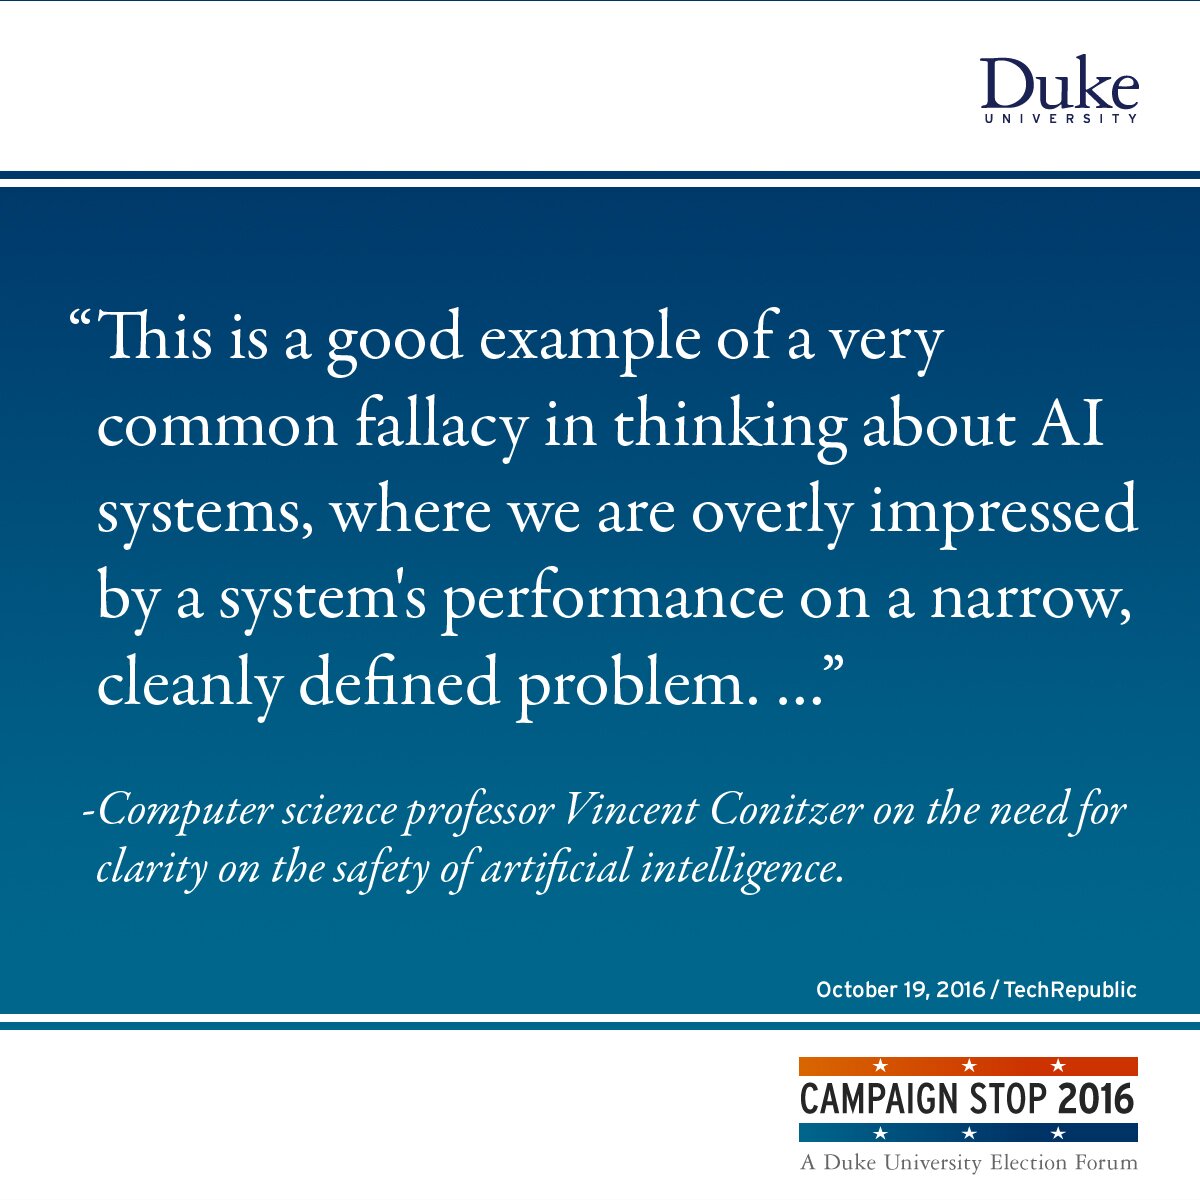 “This is a good example of a very common fallacy in thinking about AI systems, where we are overly impressed by a system